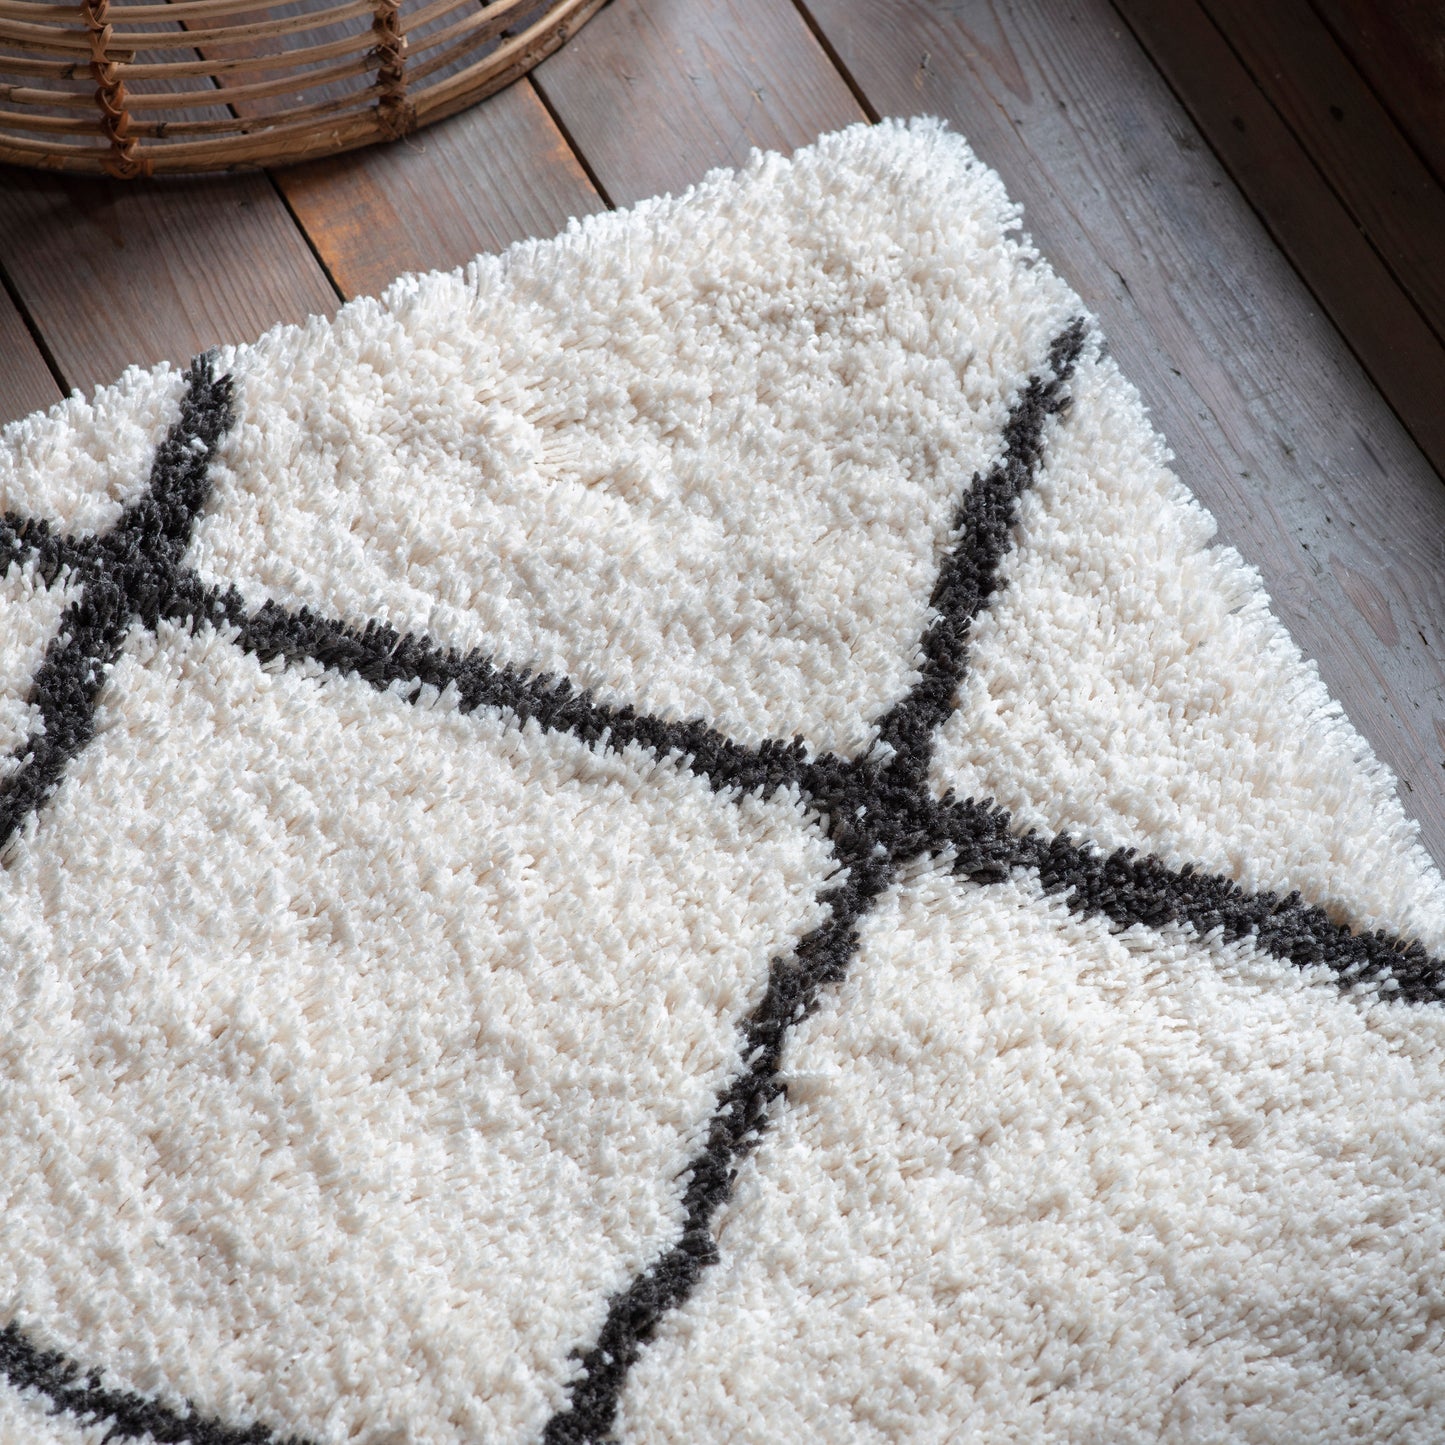 An interior decor rug from Kikiathome.co.uk enhances home furniture on a wooden floor.